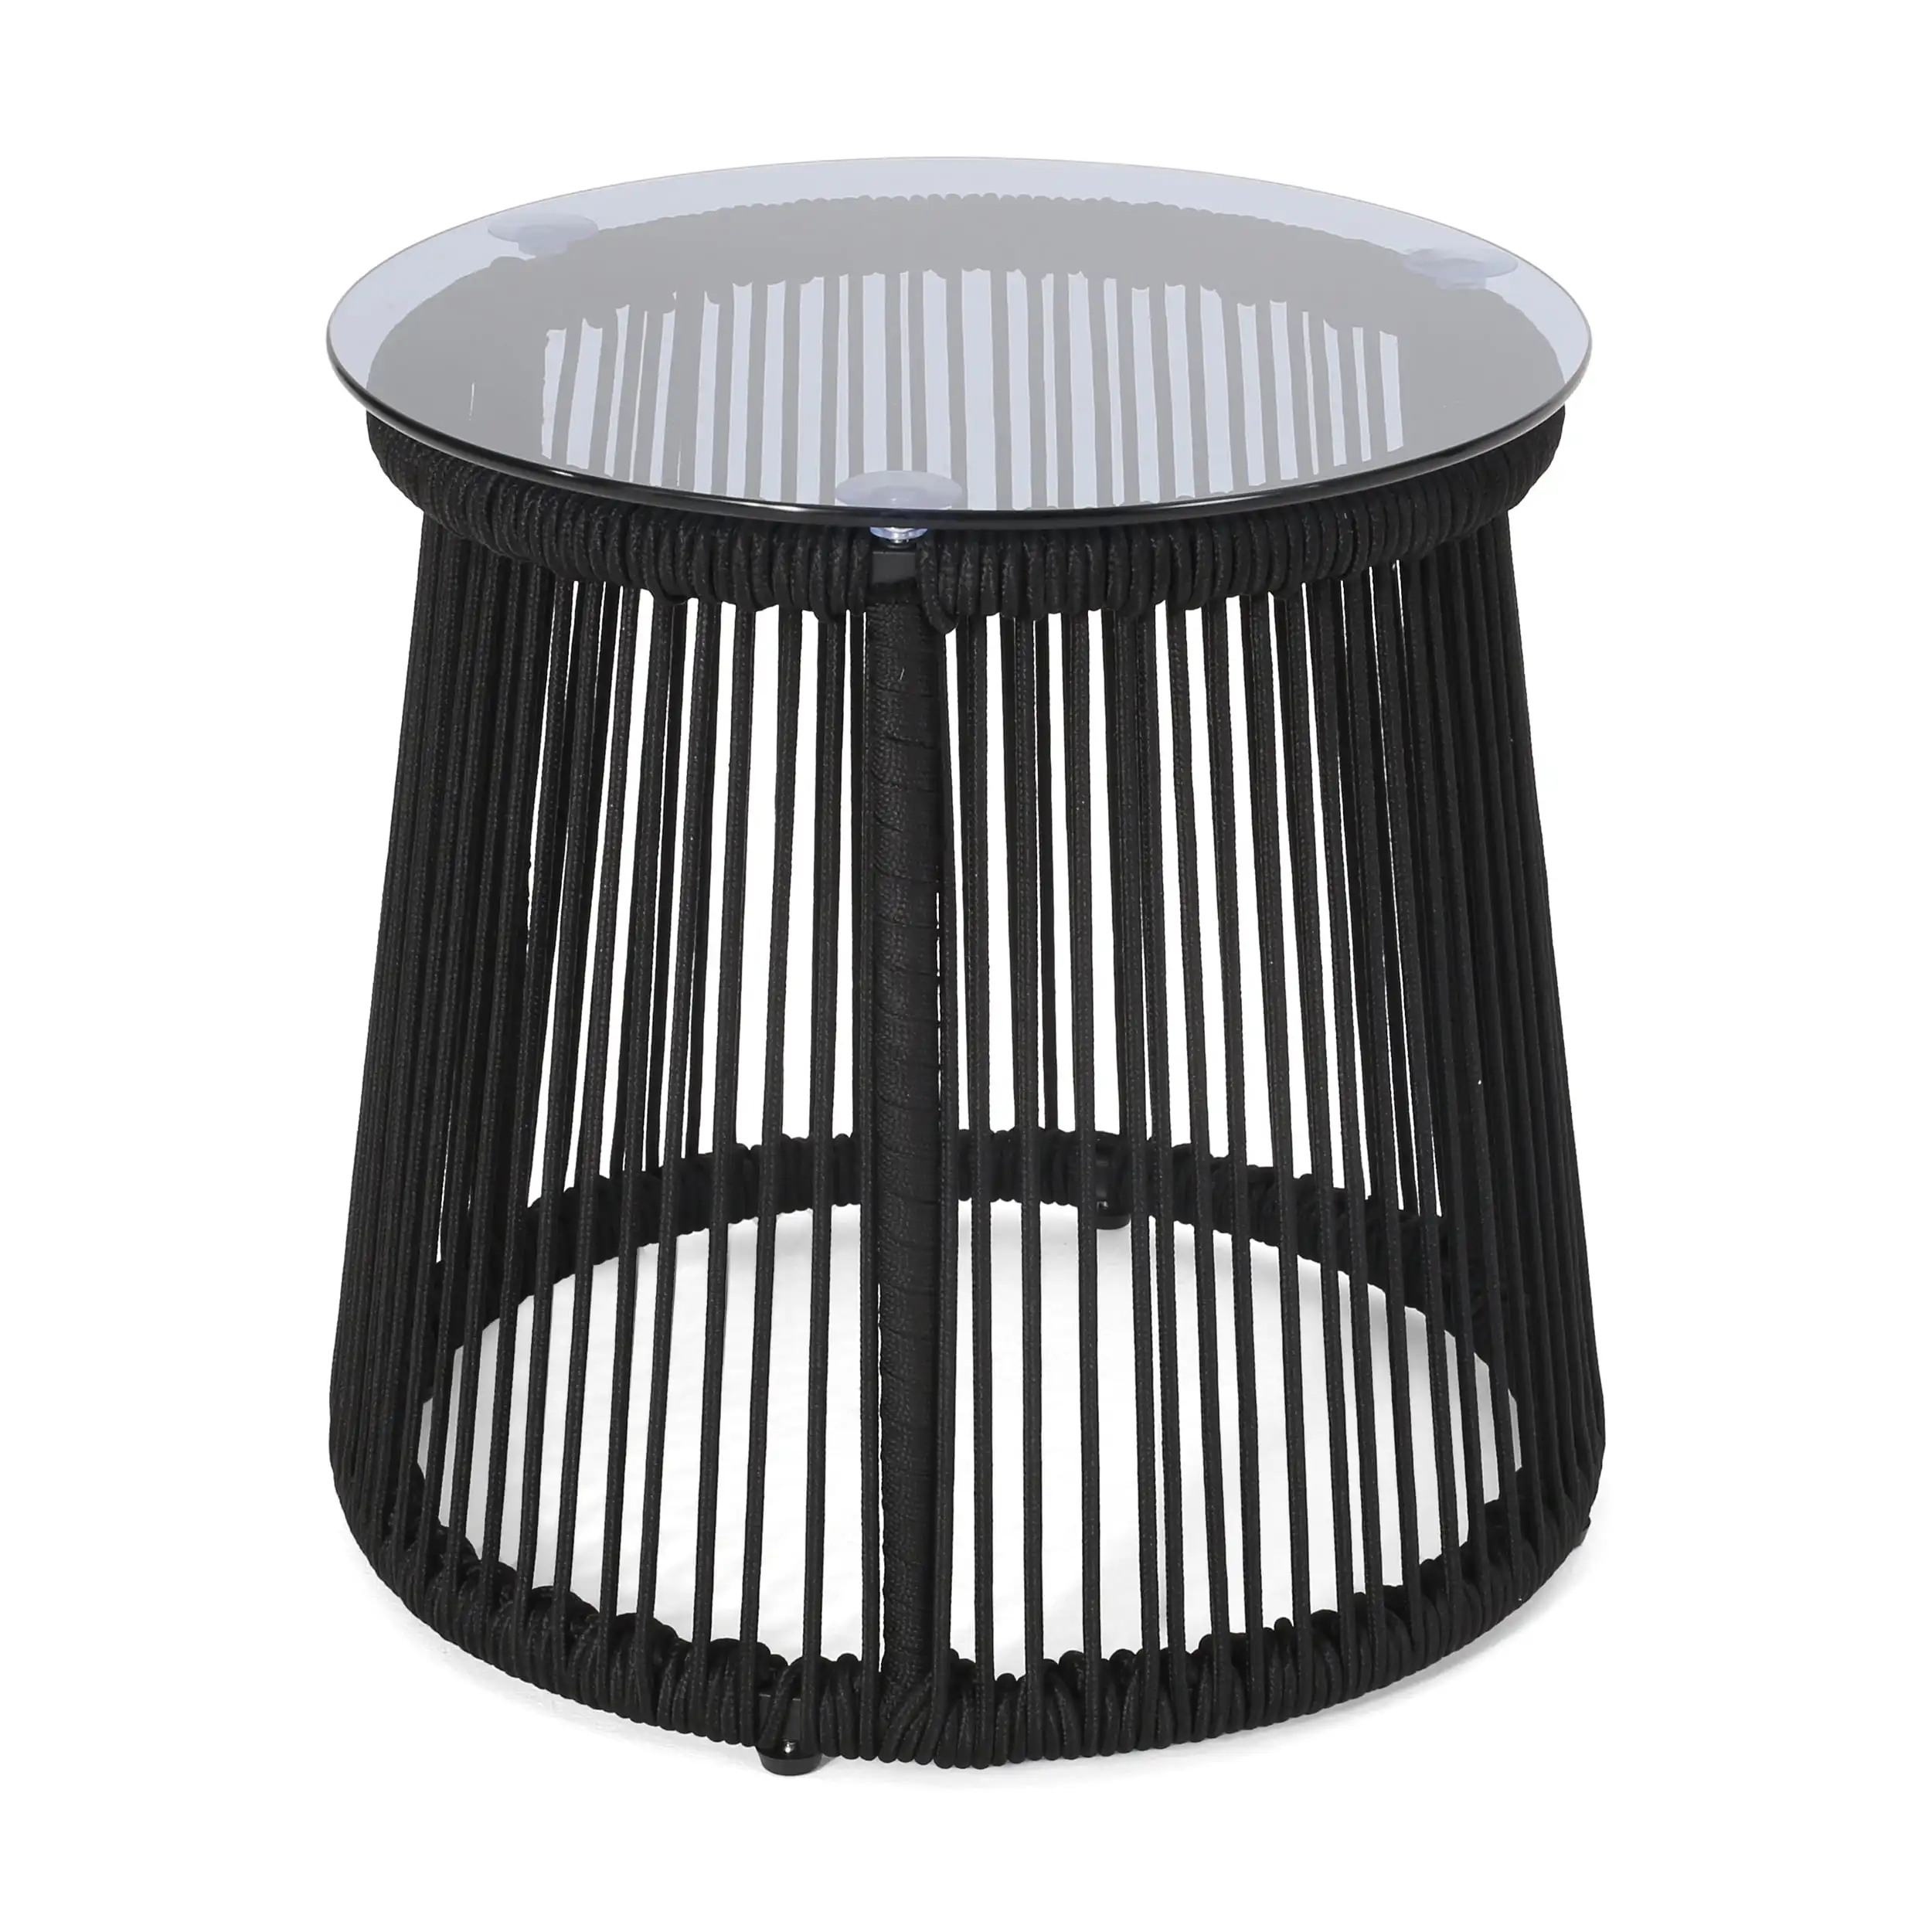 

Luxurious Refined Fashionable and Elegant Modern Outdoor Rope Weave Side Table with Tempered Glass Top Black